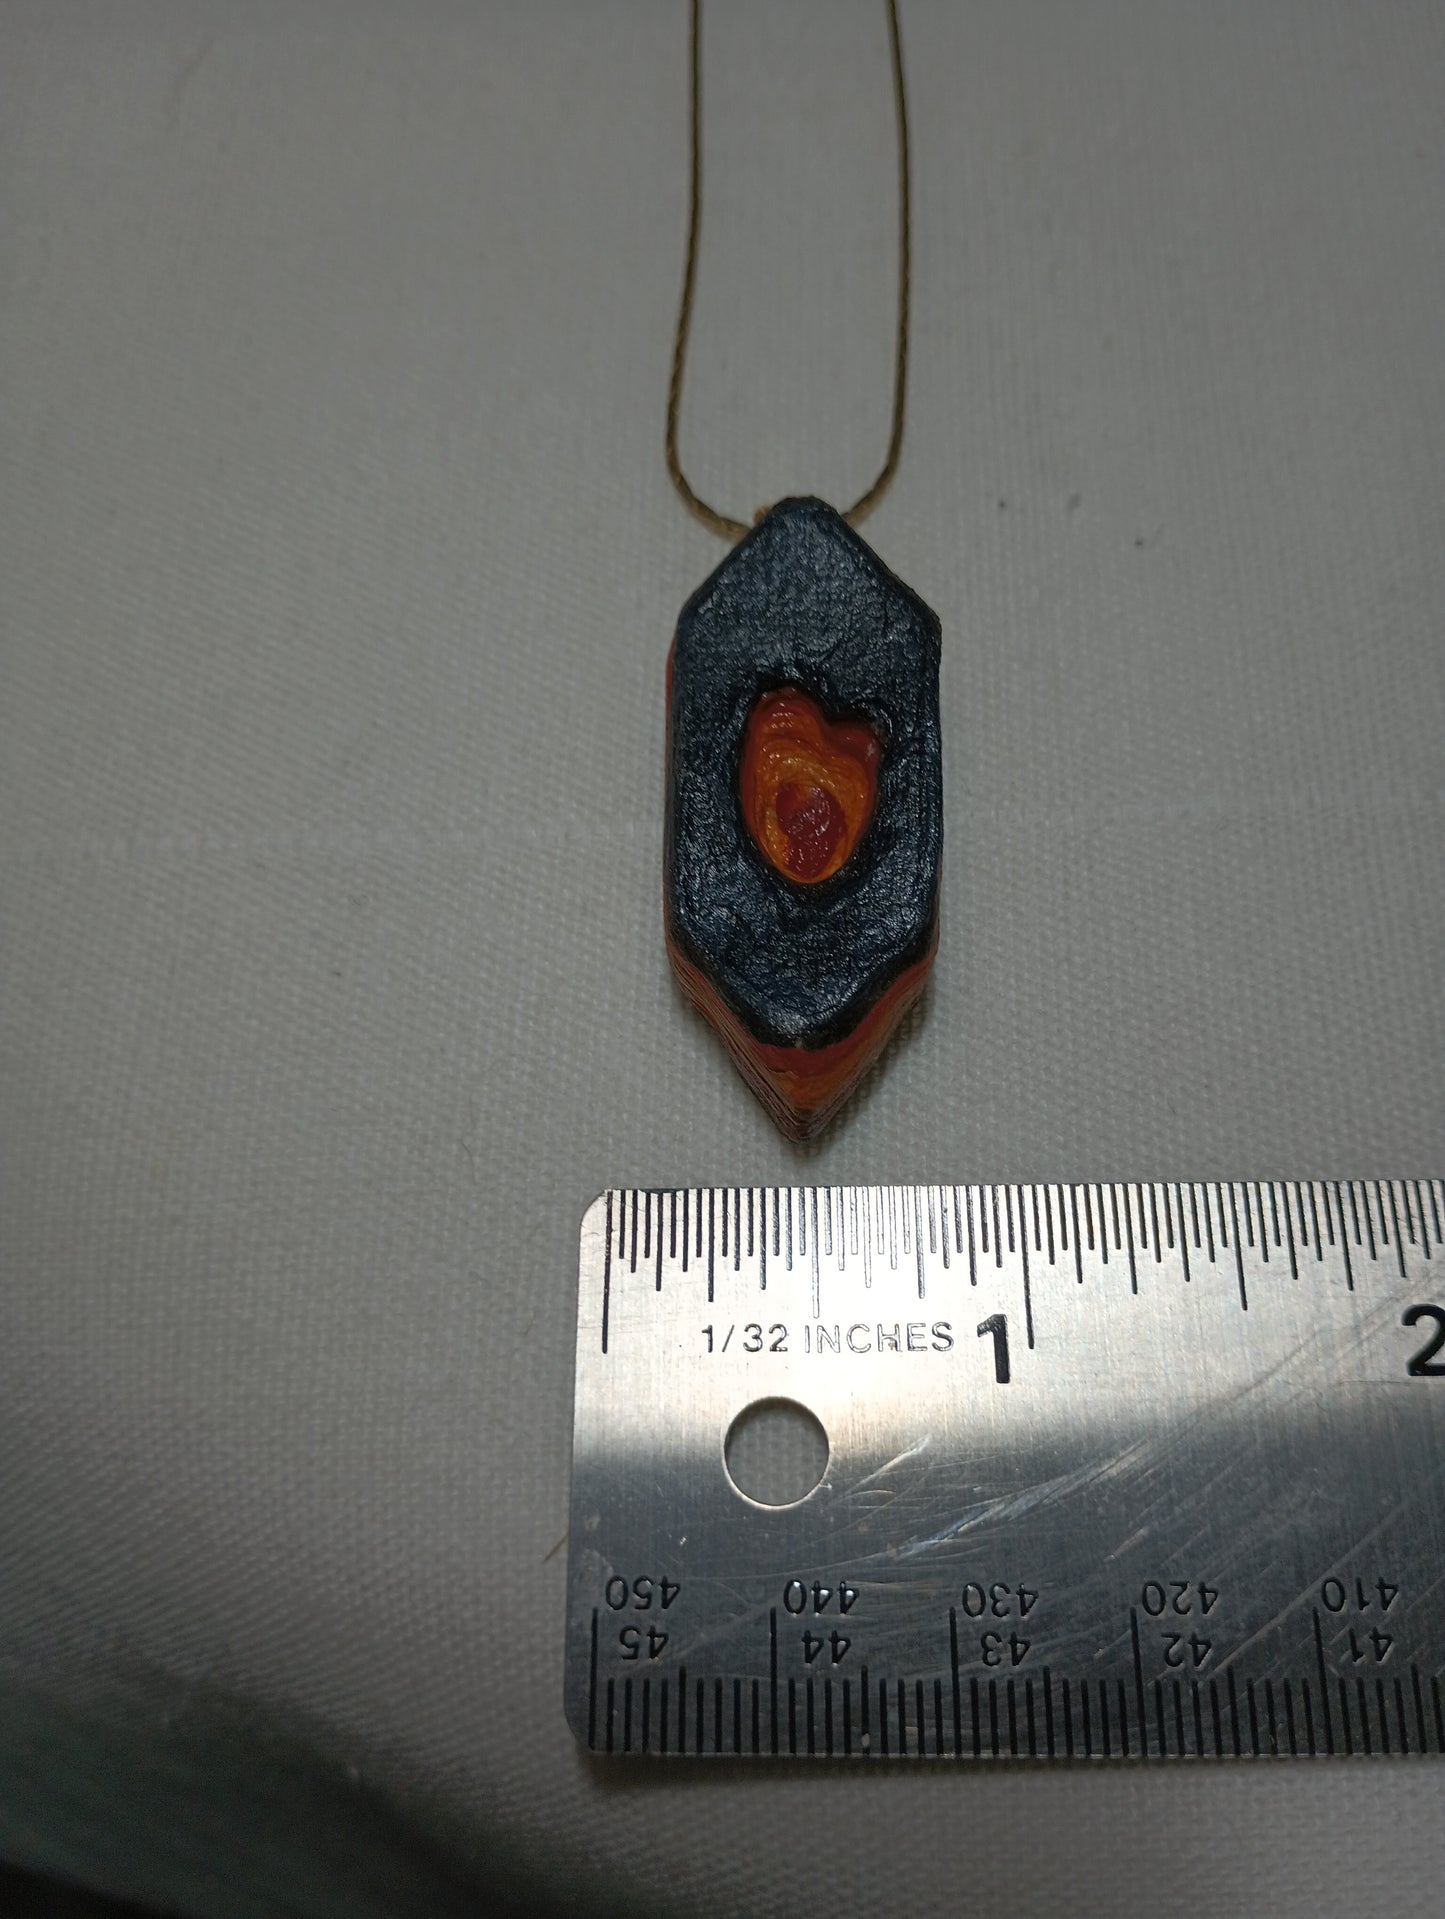 Construction Paper Pendant, Handmade, One-of-a-kind